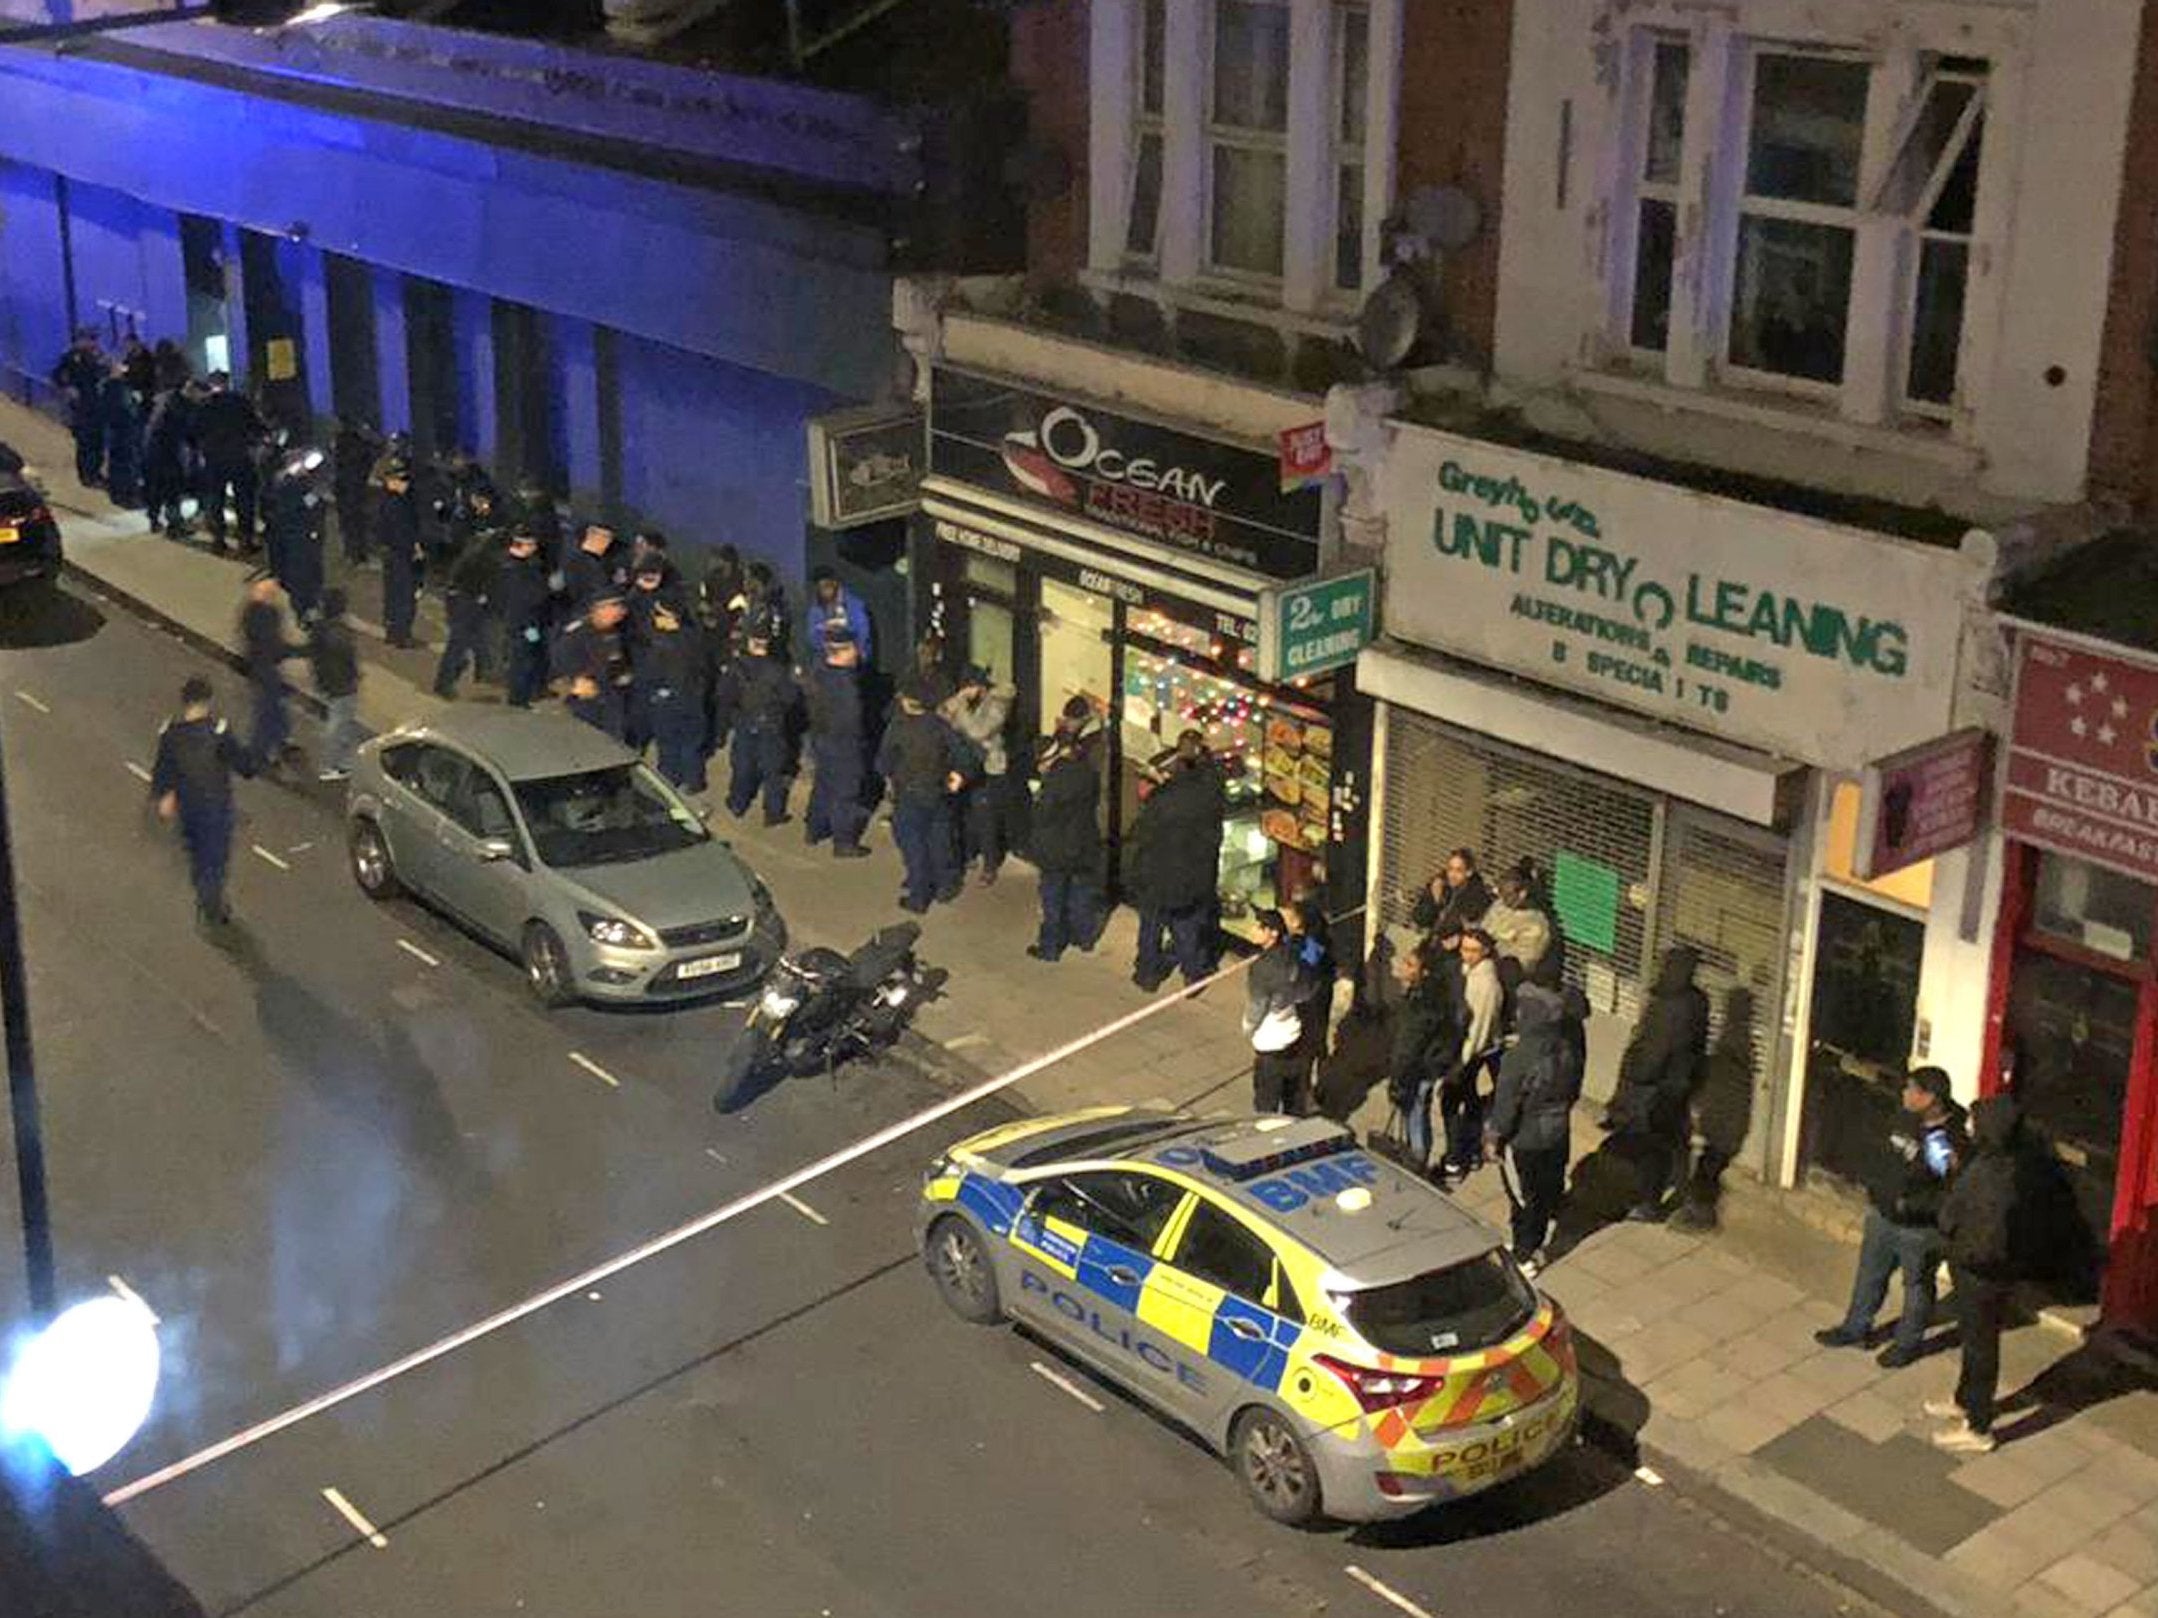 The scene opposite a property in Greyhound Road in Hammersmith, west London where thirty-nine people were arrested on suspicion of attempted murder following an incident on Fulham Palace Road